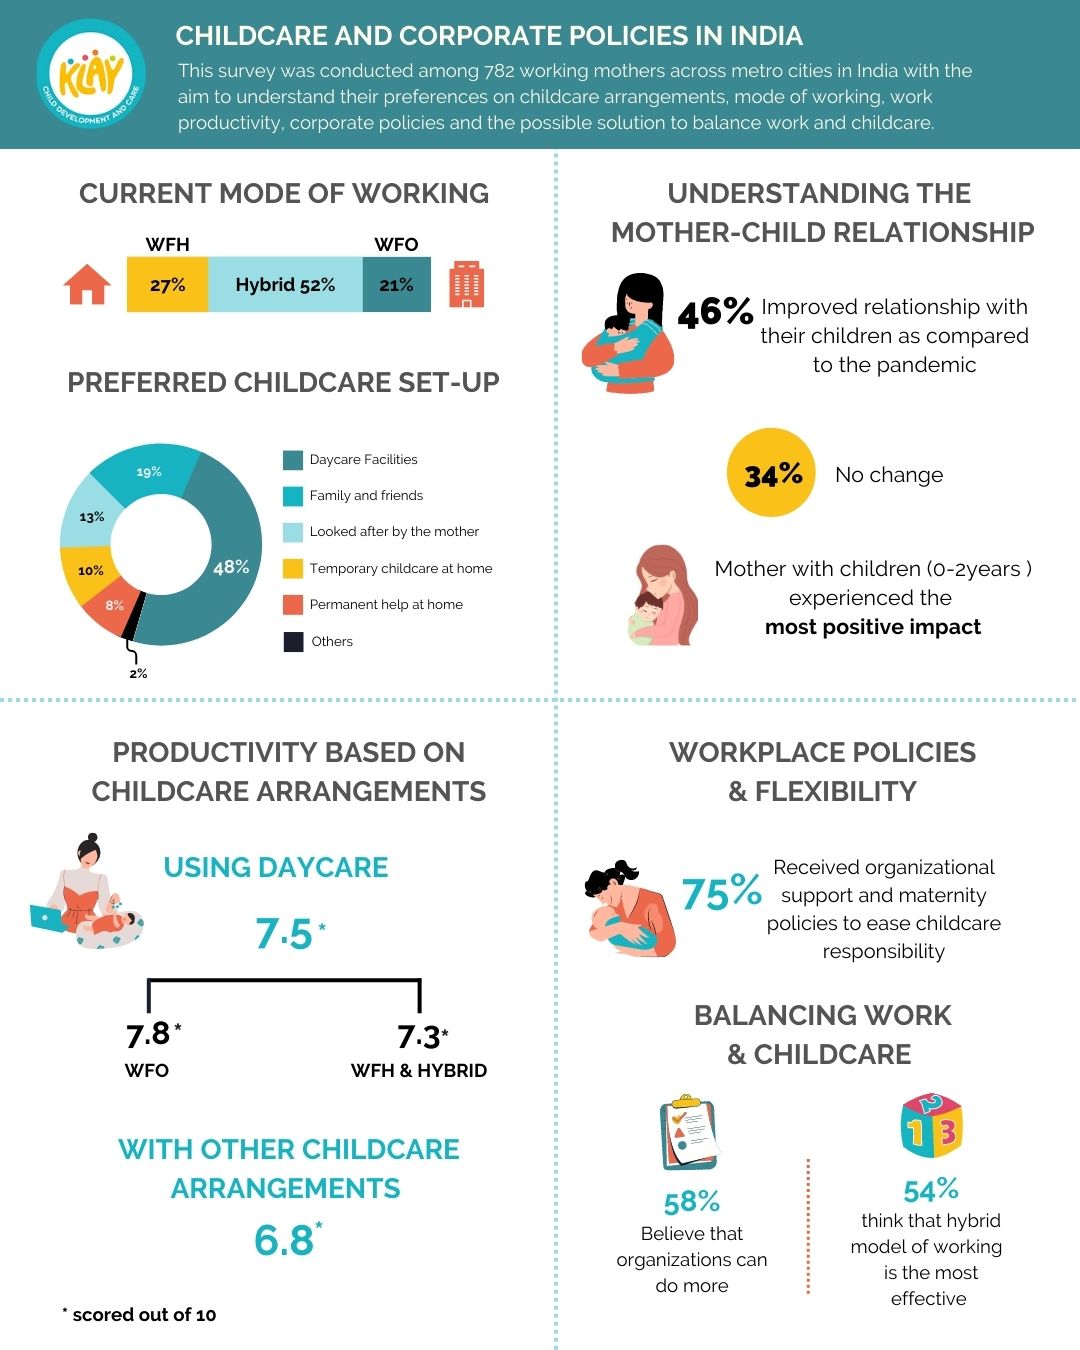 Daycare Arrangements Result in Maximum Increase in Job Productivity Among Working Moms; KLAY's Survey Reveals